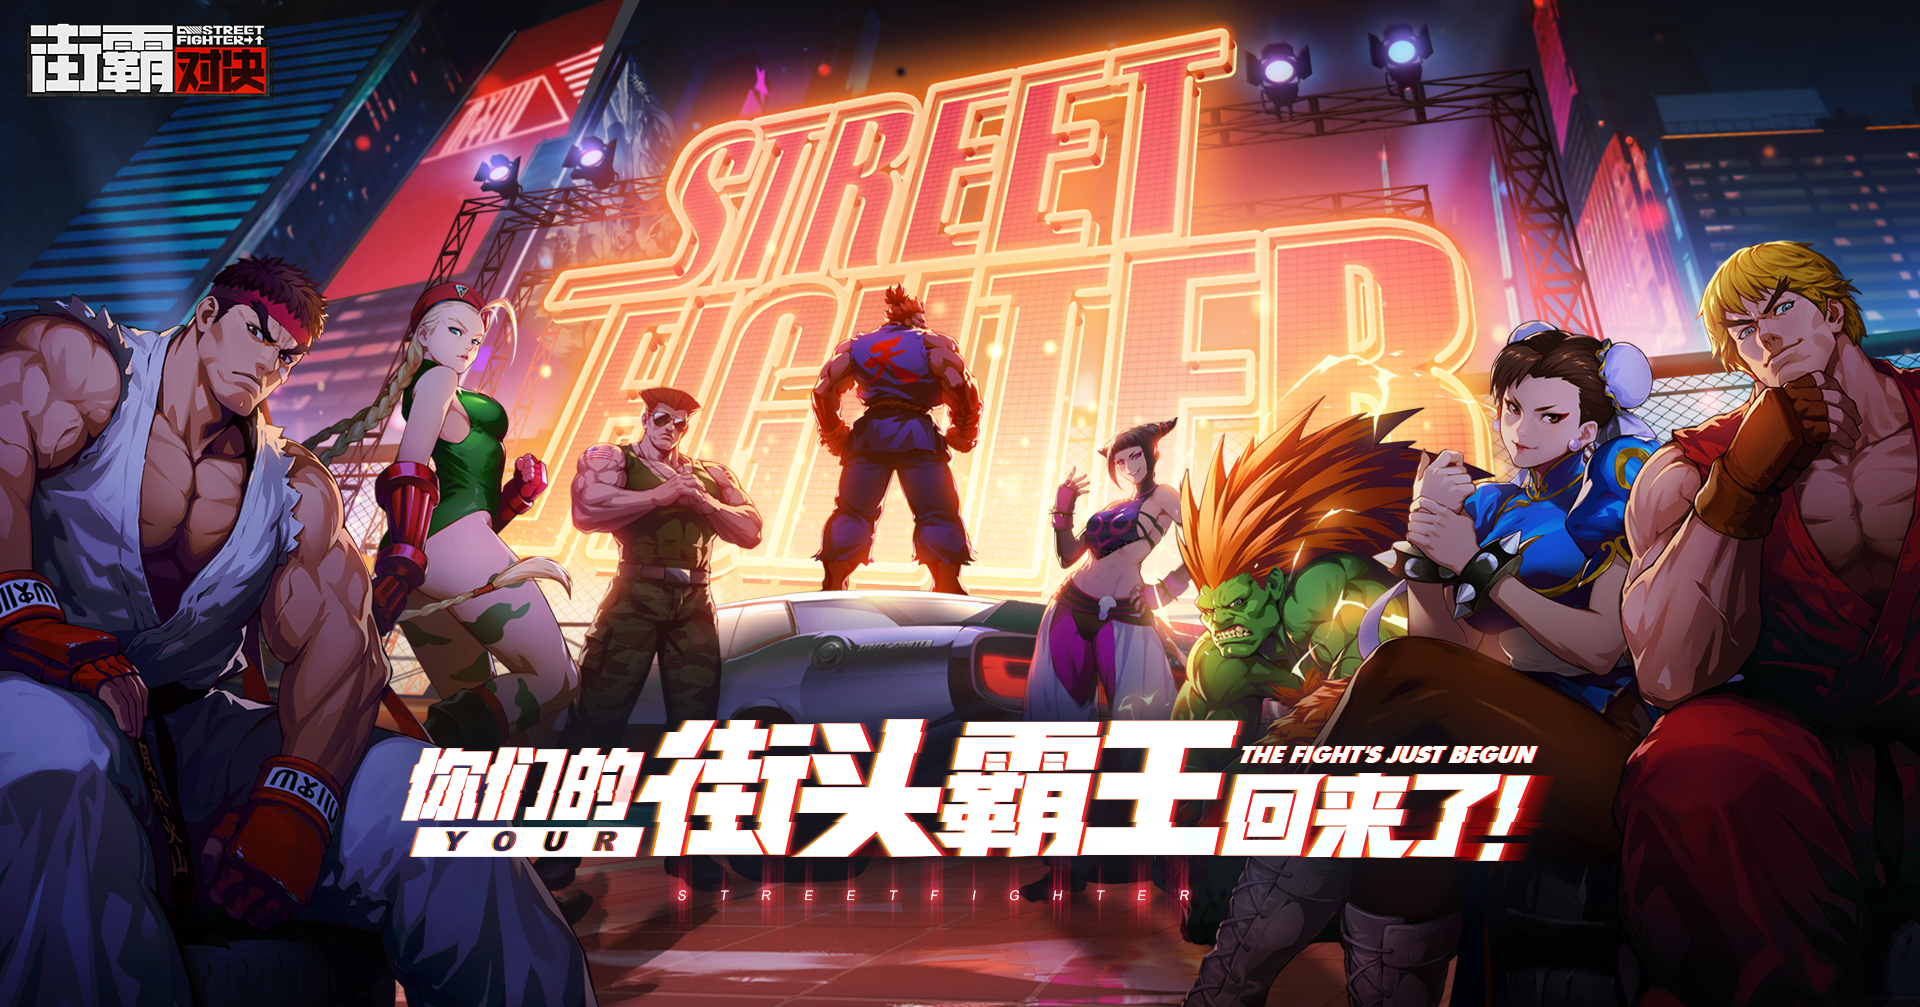 Street Fighter Duel art 1 out of 9 image gallery